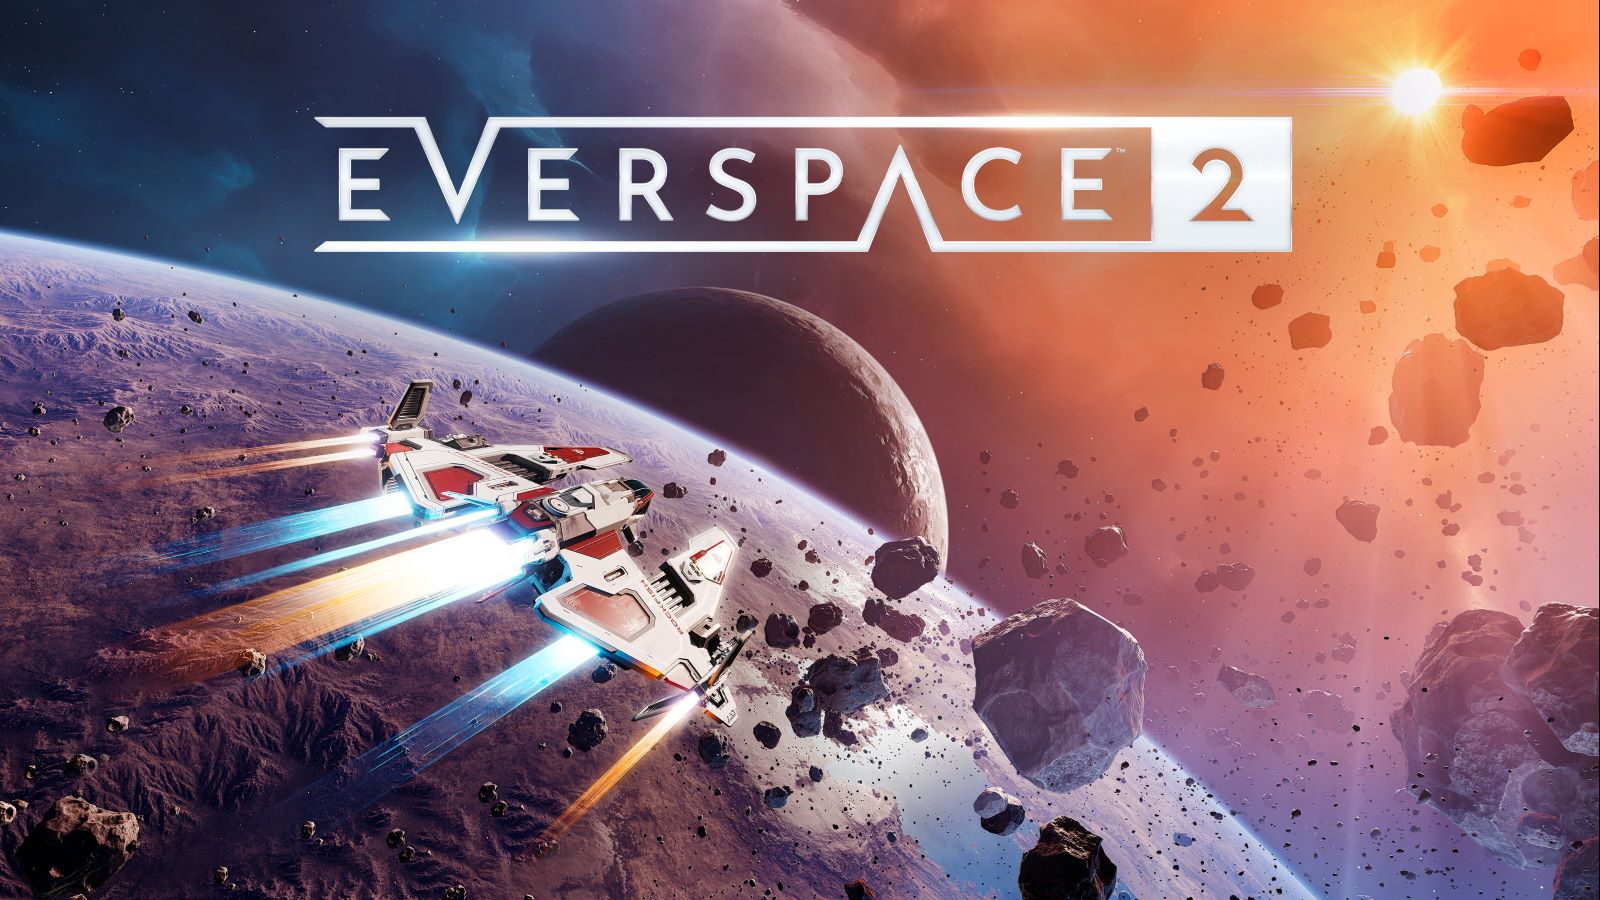 EVERSPACE 2 is now available on PC, PlayStation 5, and Xbox Series X/S